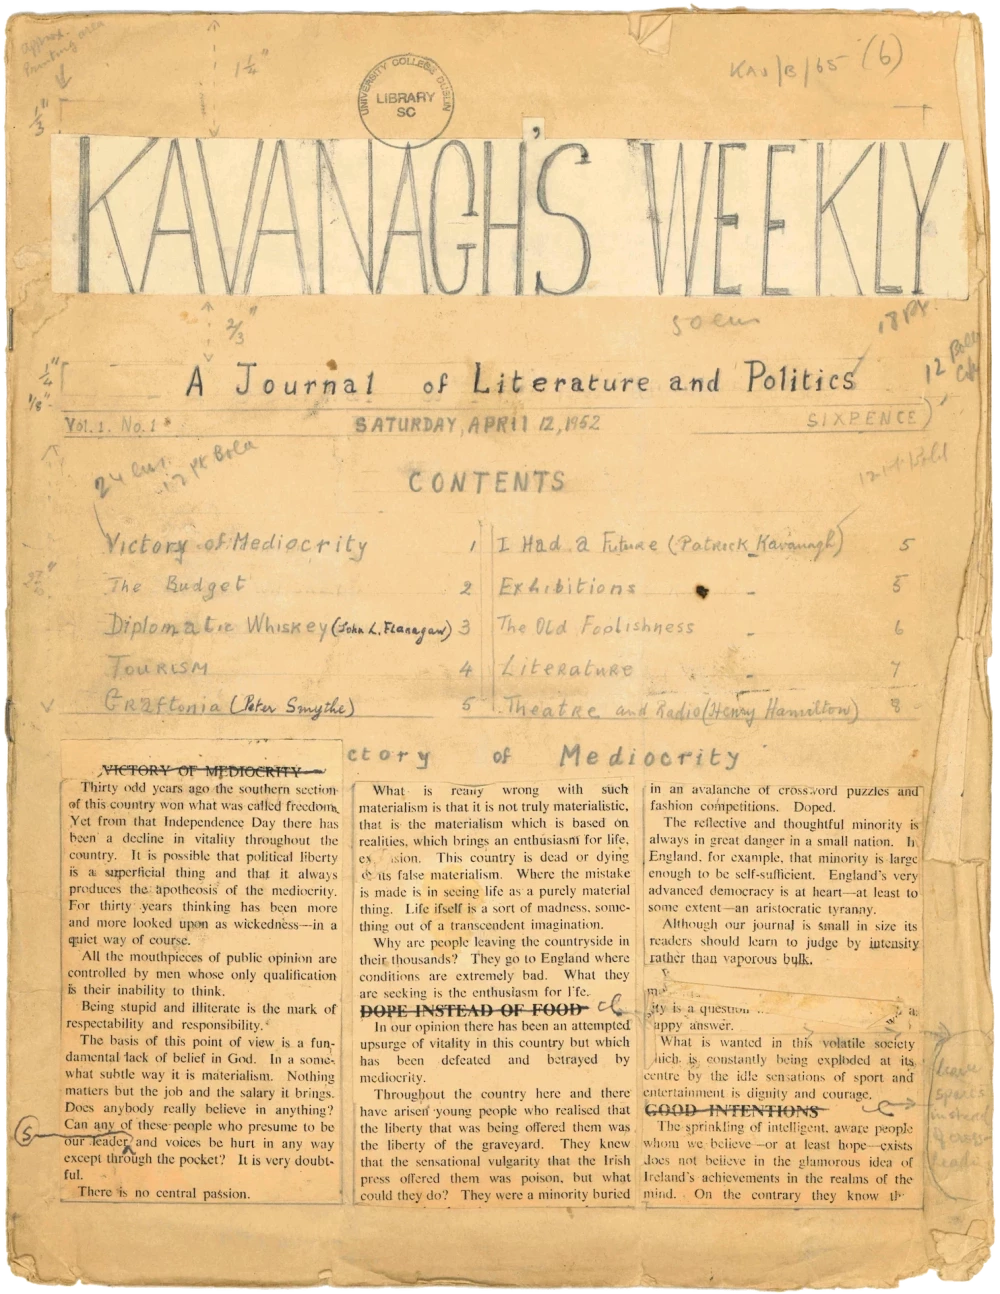 A mockup of Kavanagh's Weekly for the 12 April 1952 edition.